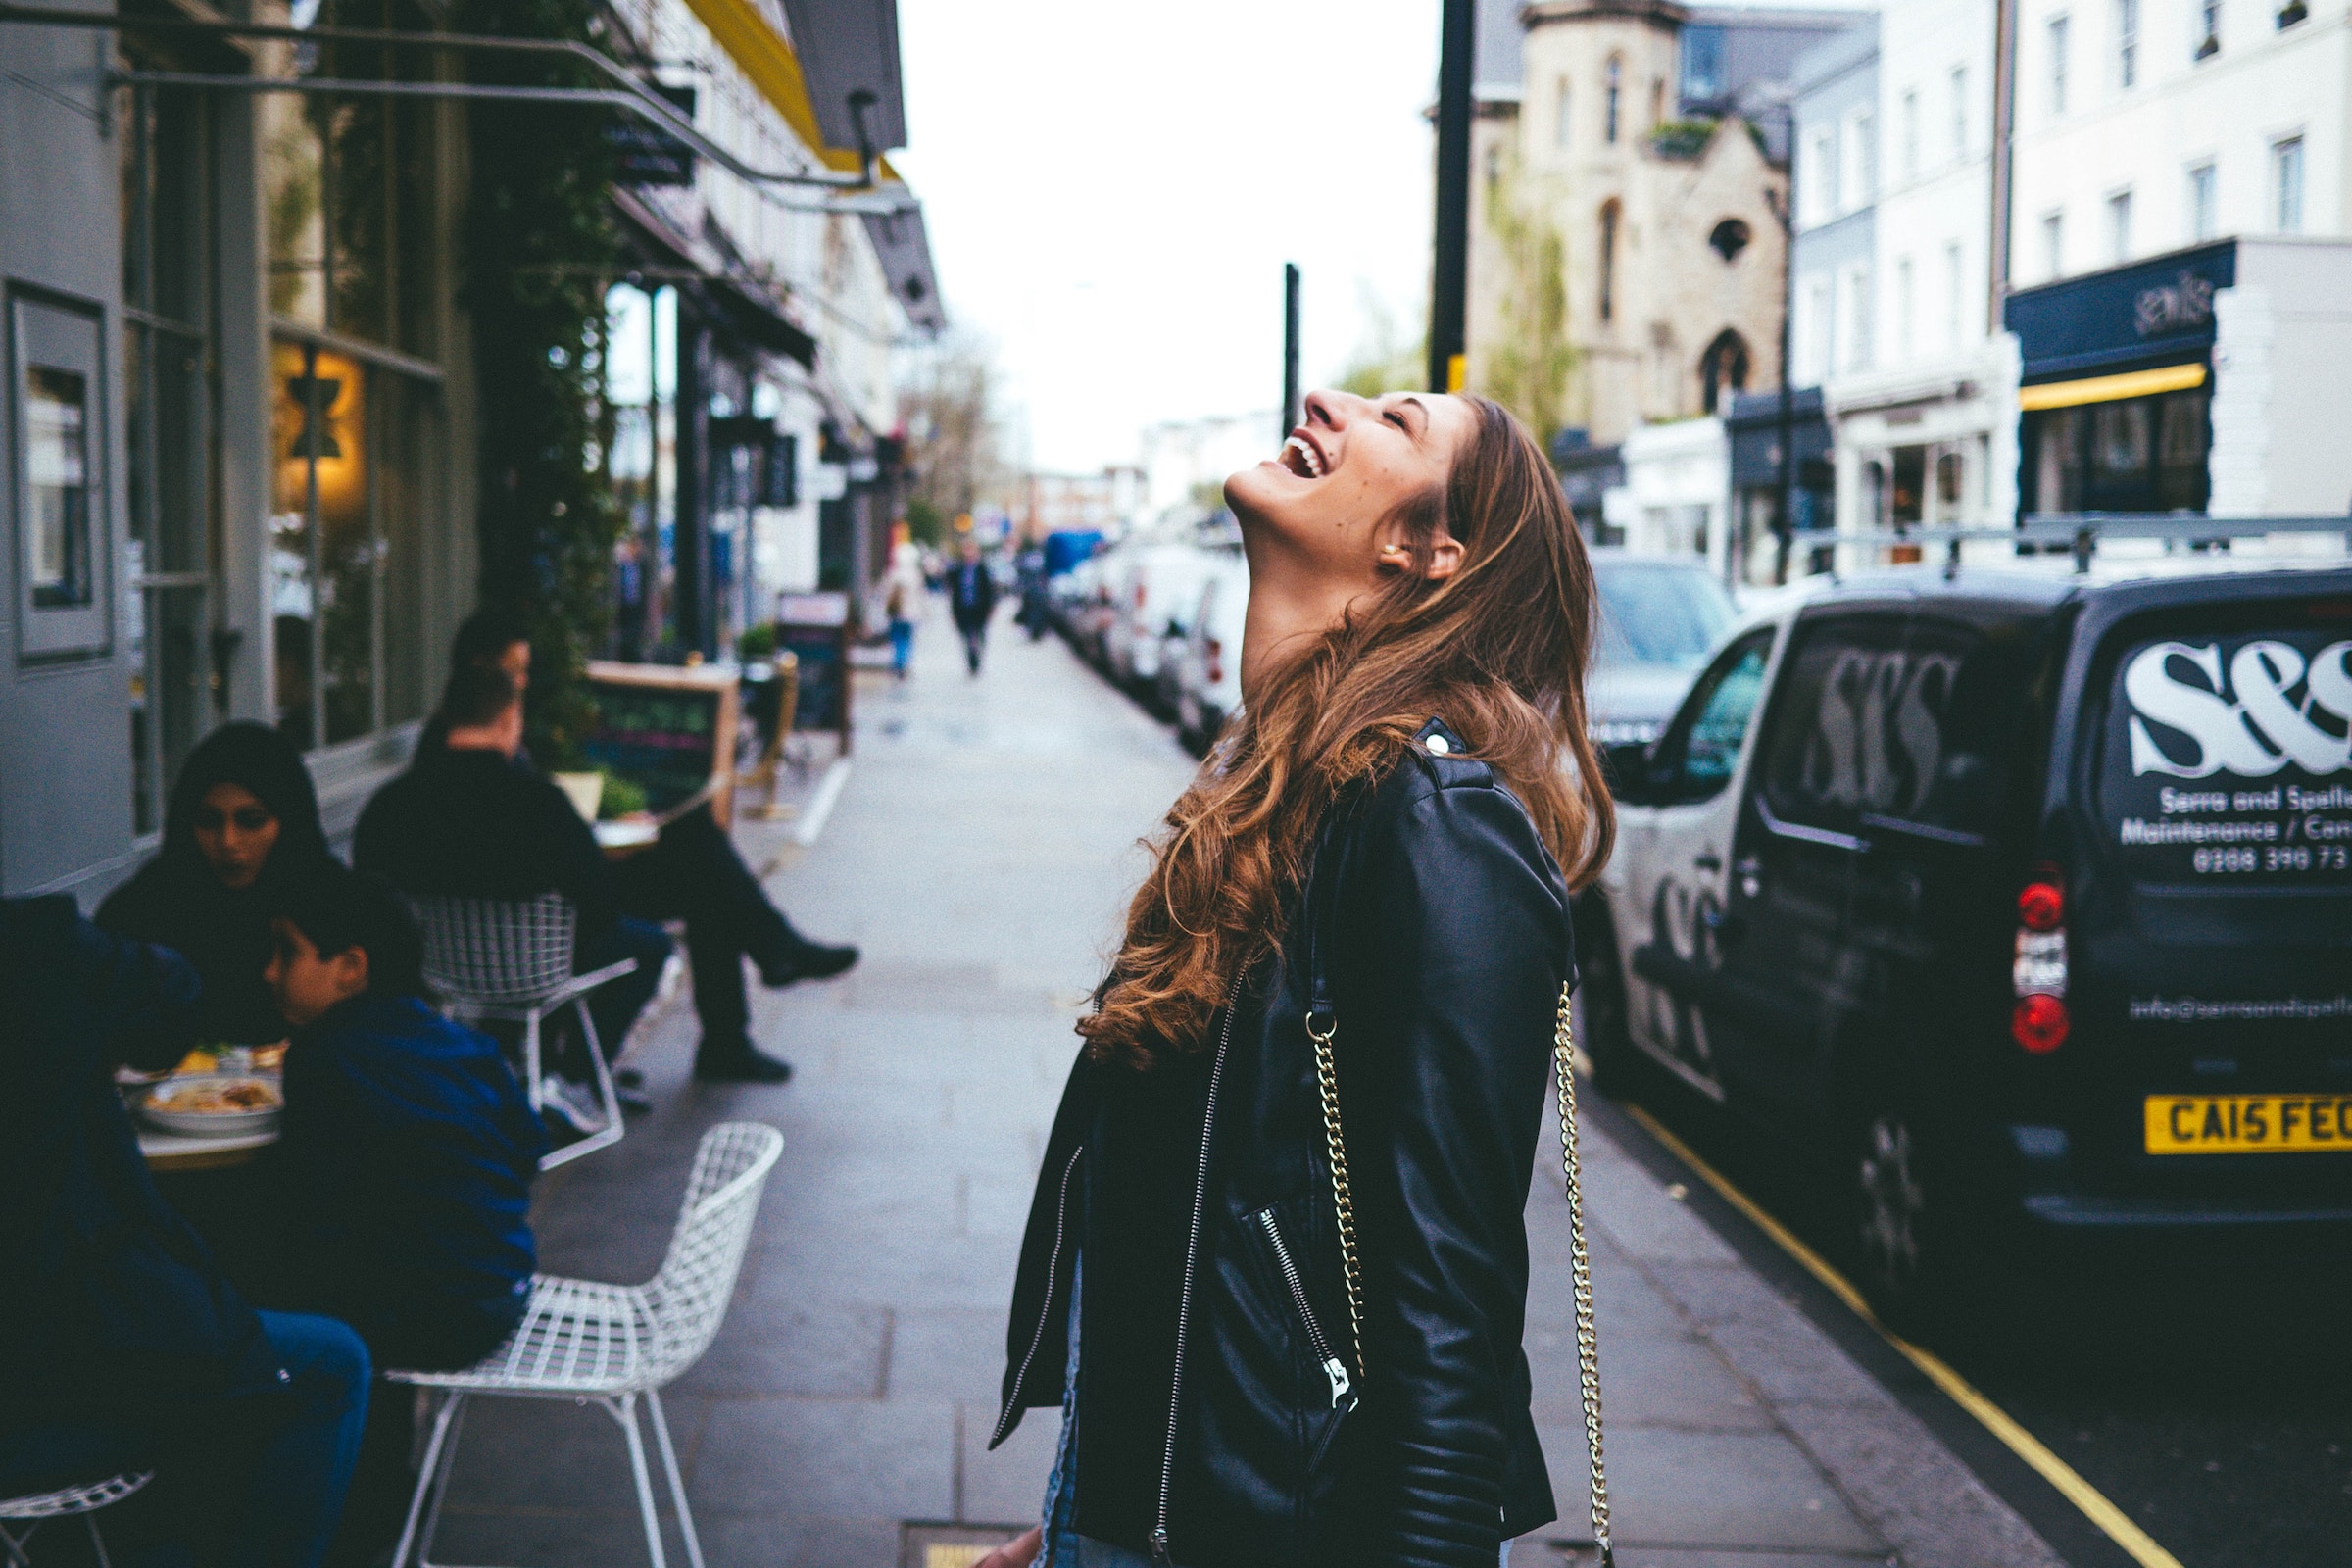 Woman laughing on a street. | Source: Unsplash